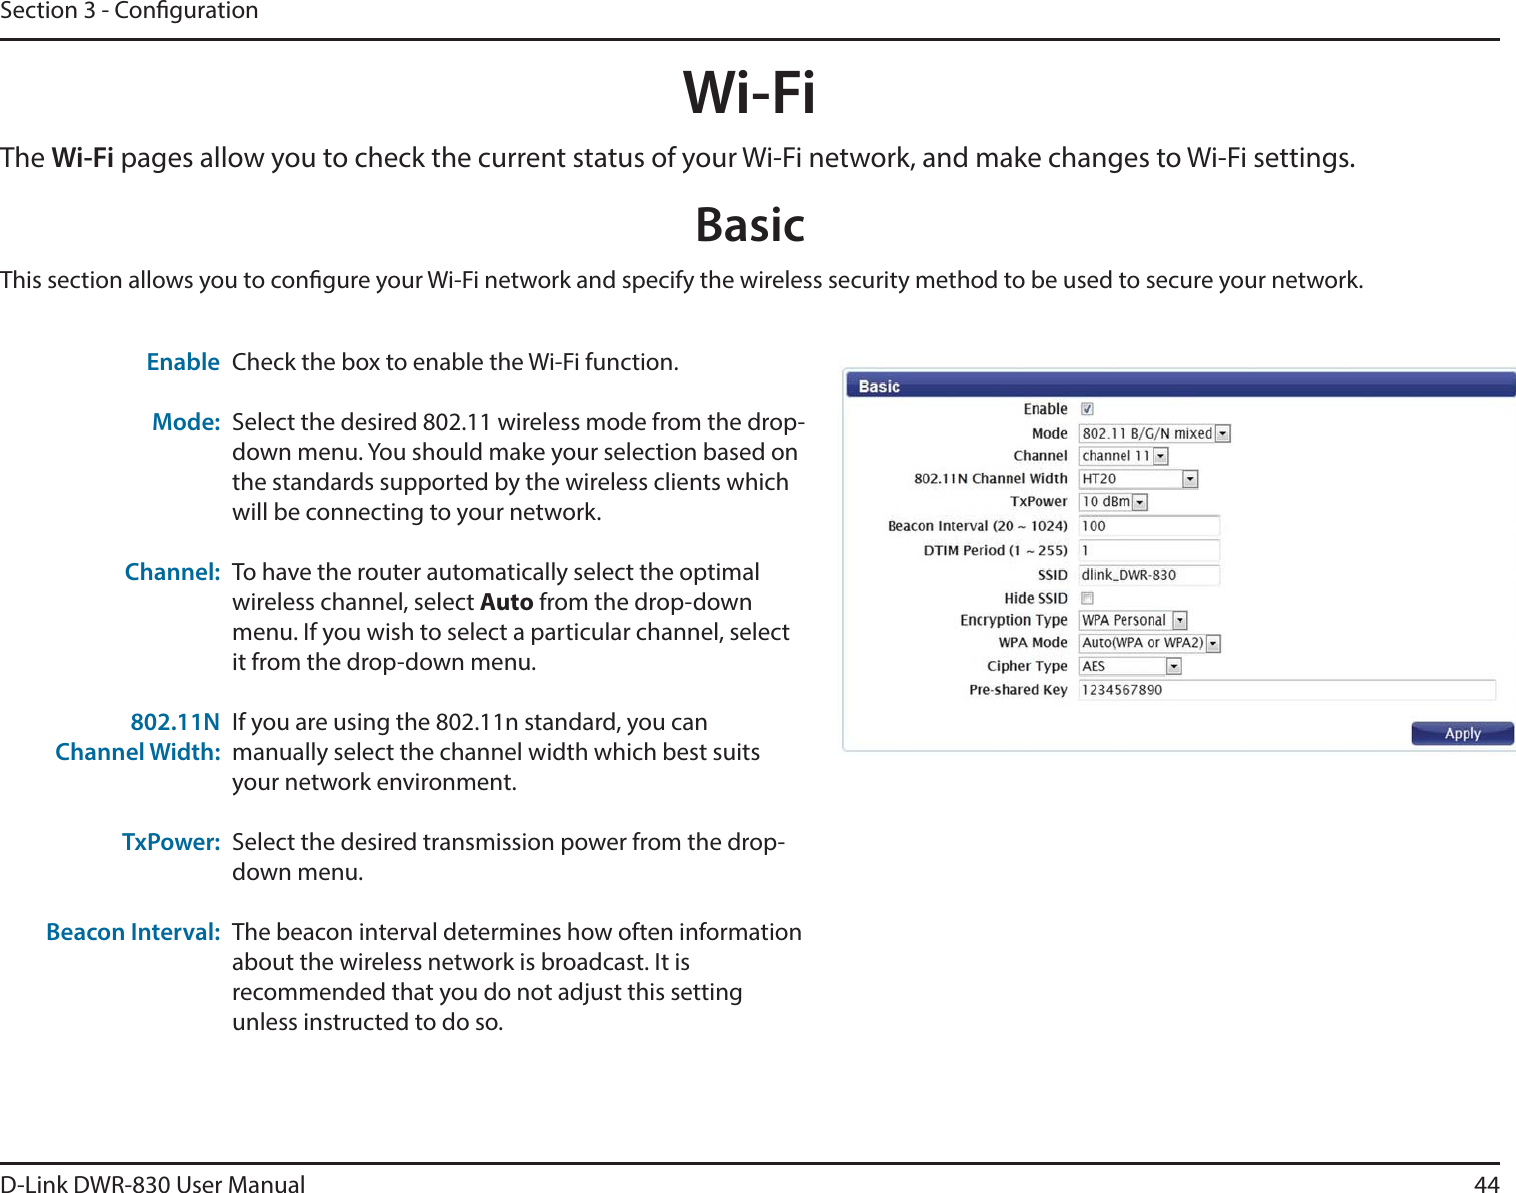 D-Link DWR-830 User Manual 44Section 3 - CongurationWi-FiThe Wi-Fi pages allow you to check the current status of your Wi-Fi network, and make changes to Wi-Fi settings.This section allows you to congure your Wi-Fi network and specify the wireless security method to be used to secure your network. BasicCheck the box to enable the Wi-Fi function.Select the desired 802.11 wireless mode from the drop-down menu. You should make your selection based on the standards supported by the wireless clients which will be connecting to your network. To have the router automatically select the optimal wireless channel, select Auto from the drop-down menu. If you wish to select a particular channel, select it from the drop-down menu. If you are using the 802.11n standard, you can manually select the channel width which best suits your network environment. Select the desired transmission power from the drop-down menu.The beacon interval determines how often information about the wireless network is broadcast. It is recommended that you do not adjust this setting unless instructed to do so. Enable  Mode:Channel:802.11N Channel Width:TxPower:Beacon Interval: